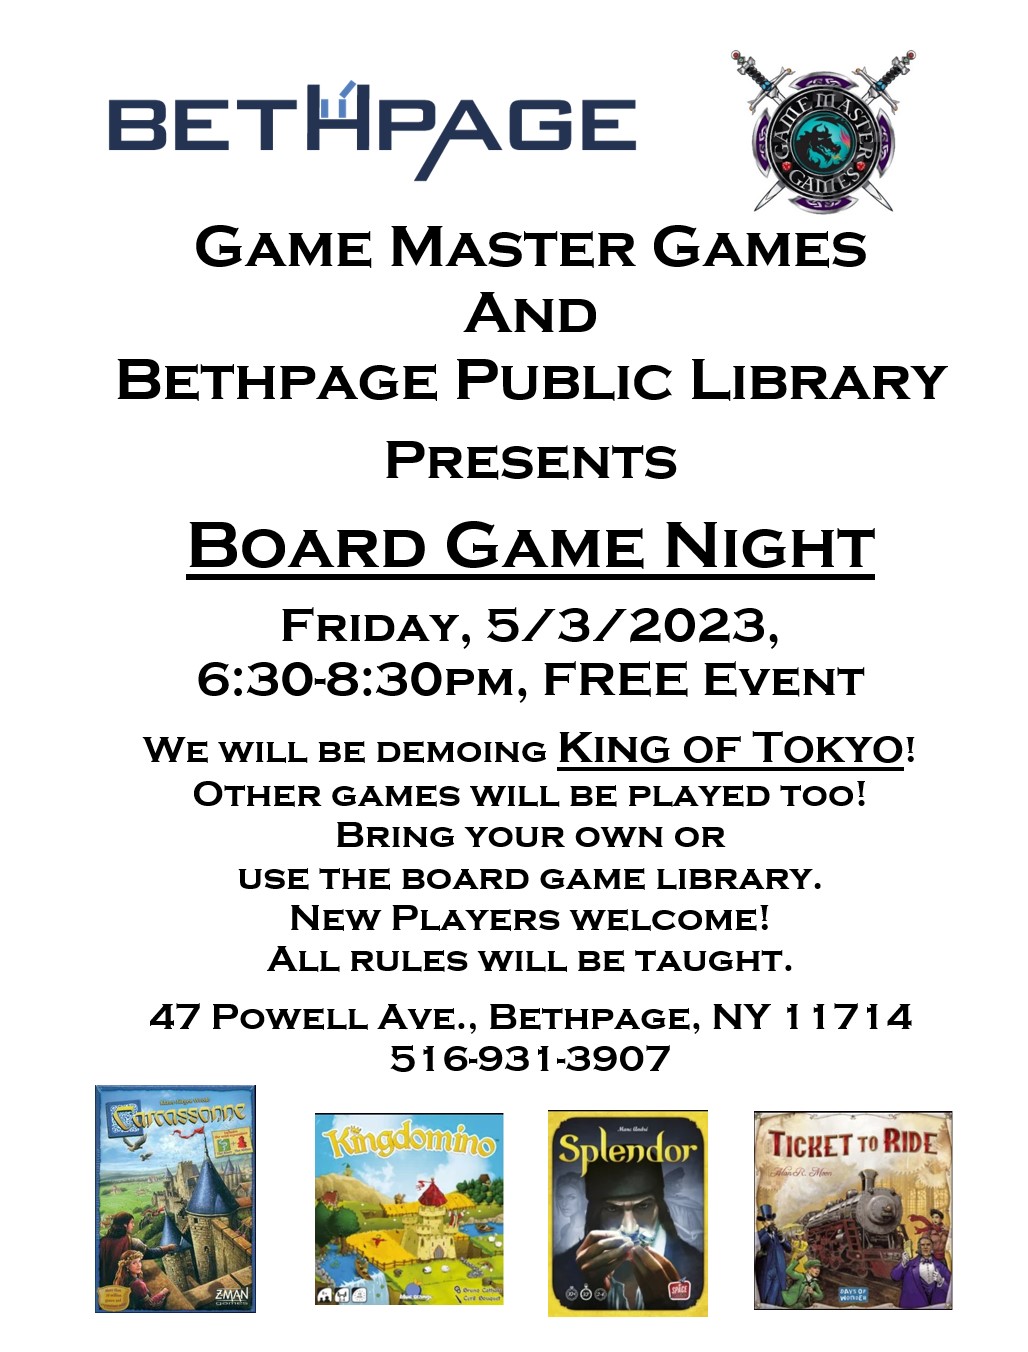 Have fun and make some new friends! Board Game Night at the Bethpage Library!